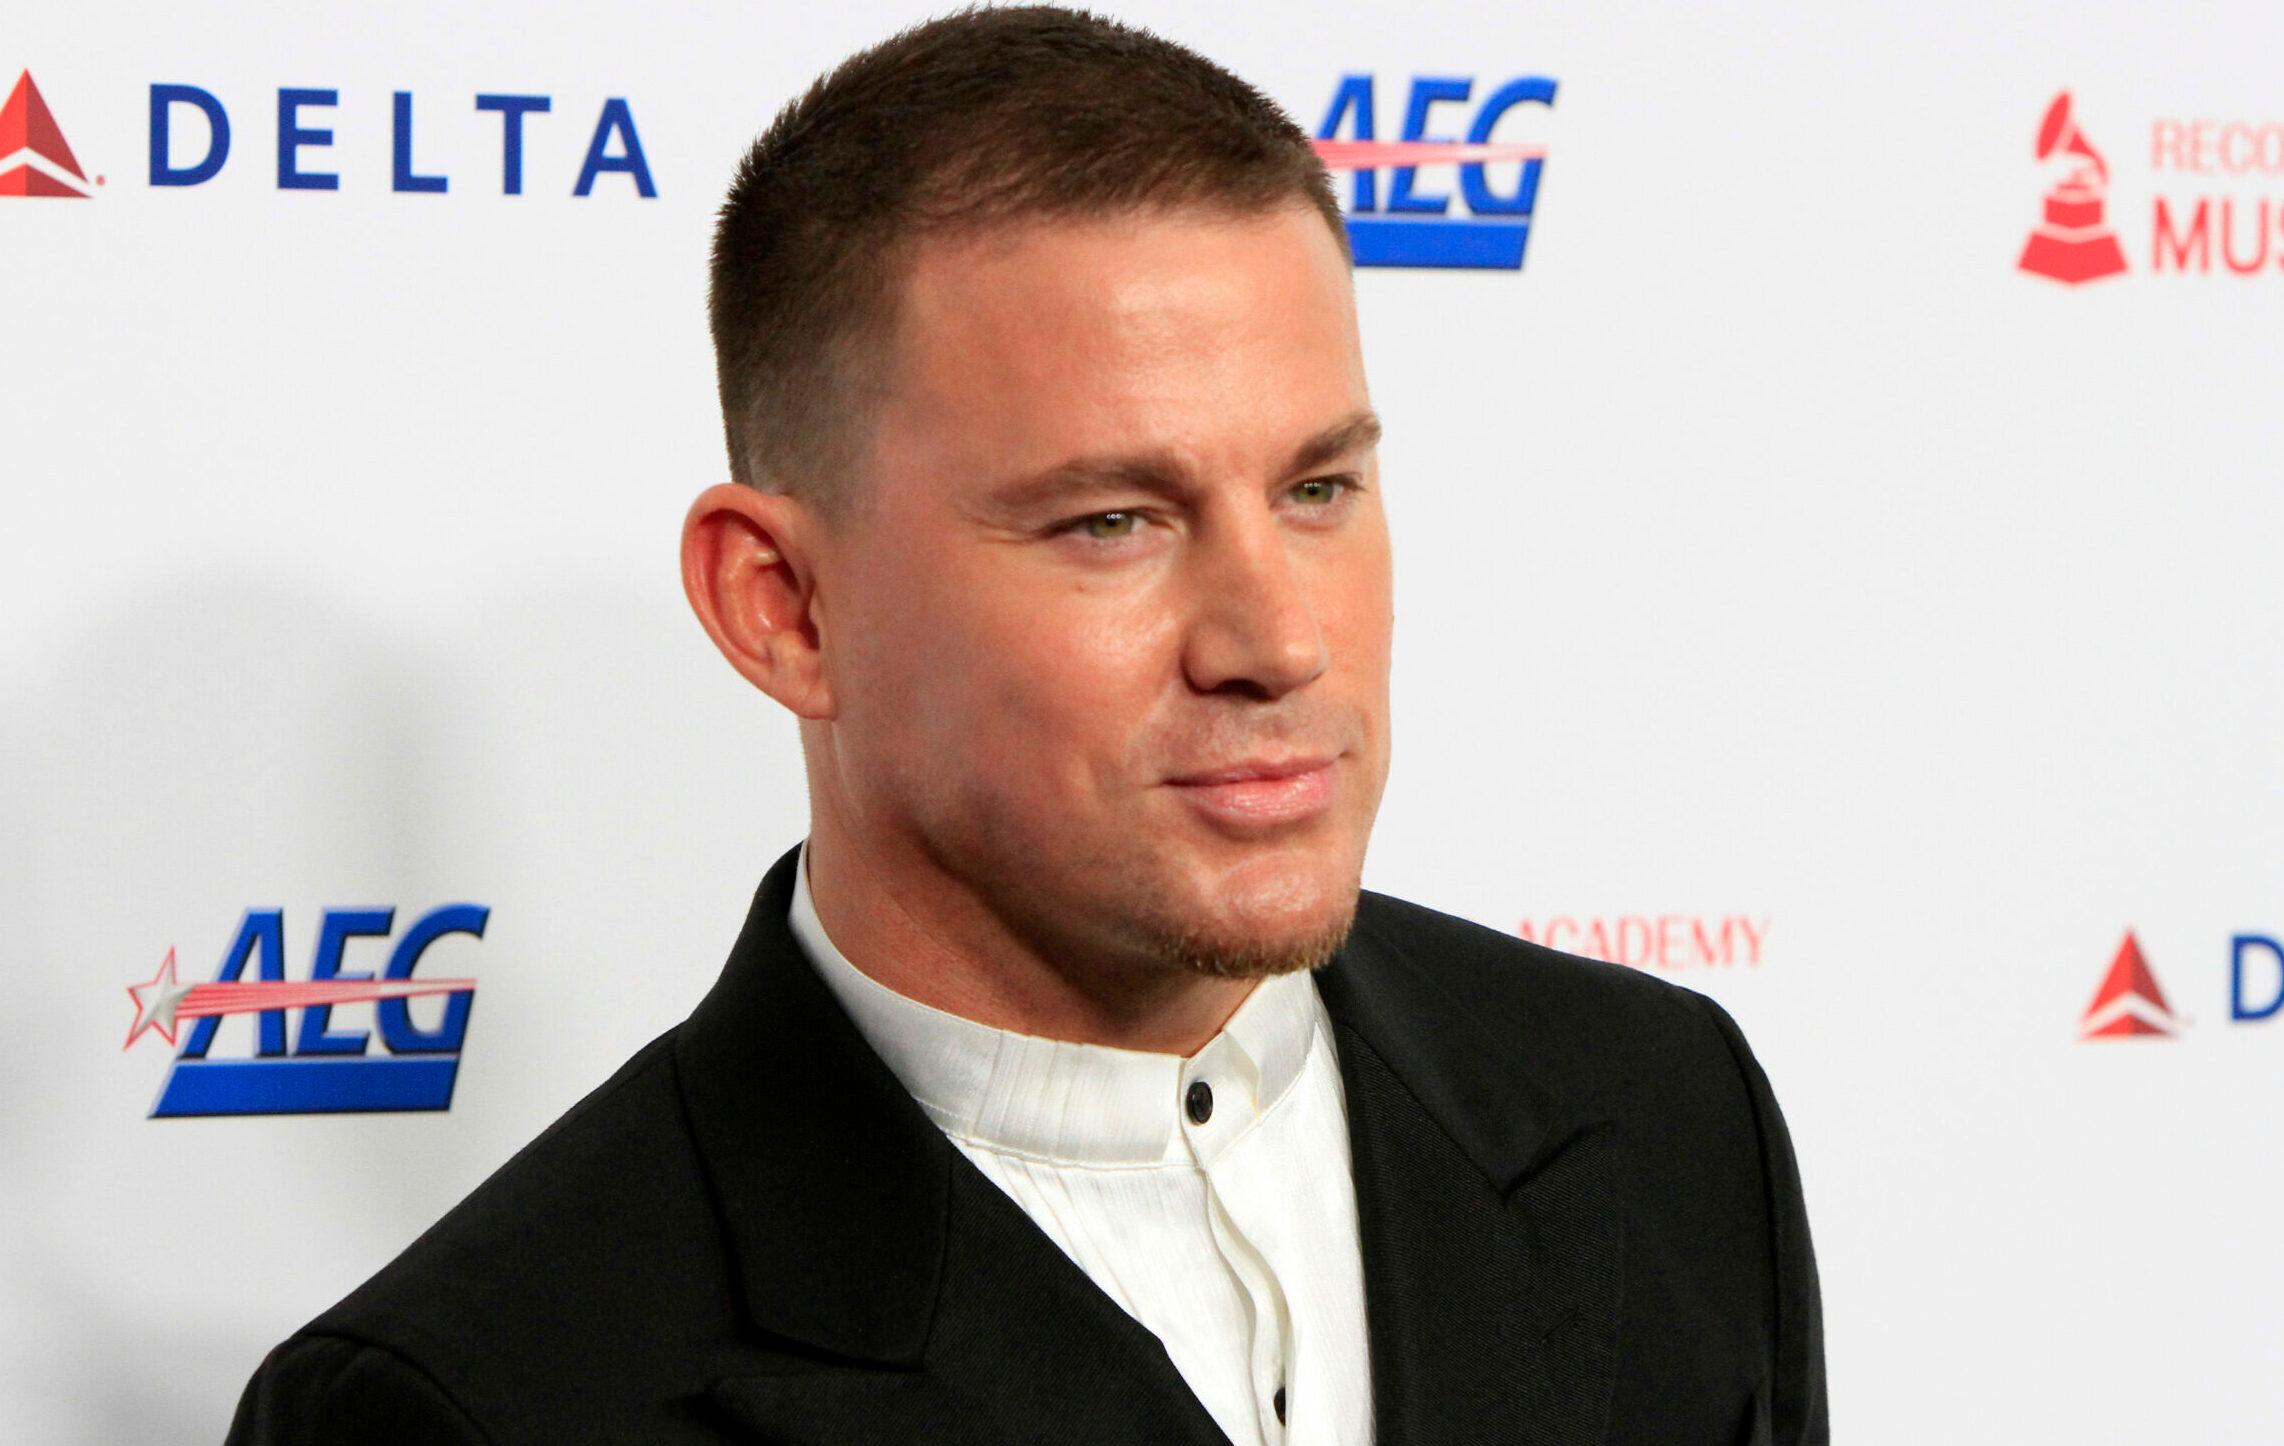 Channing Tatum at the 2020 Muiscares at the Los Angeles Convention Center 